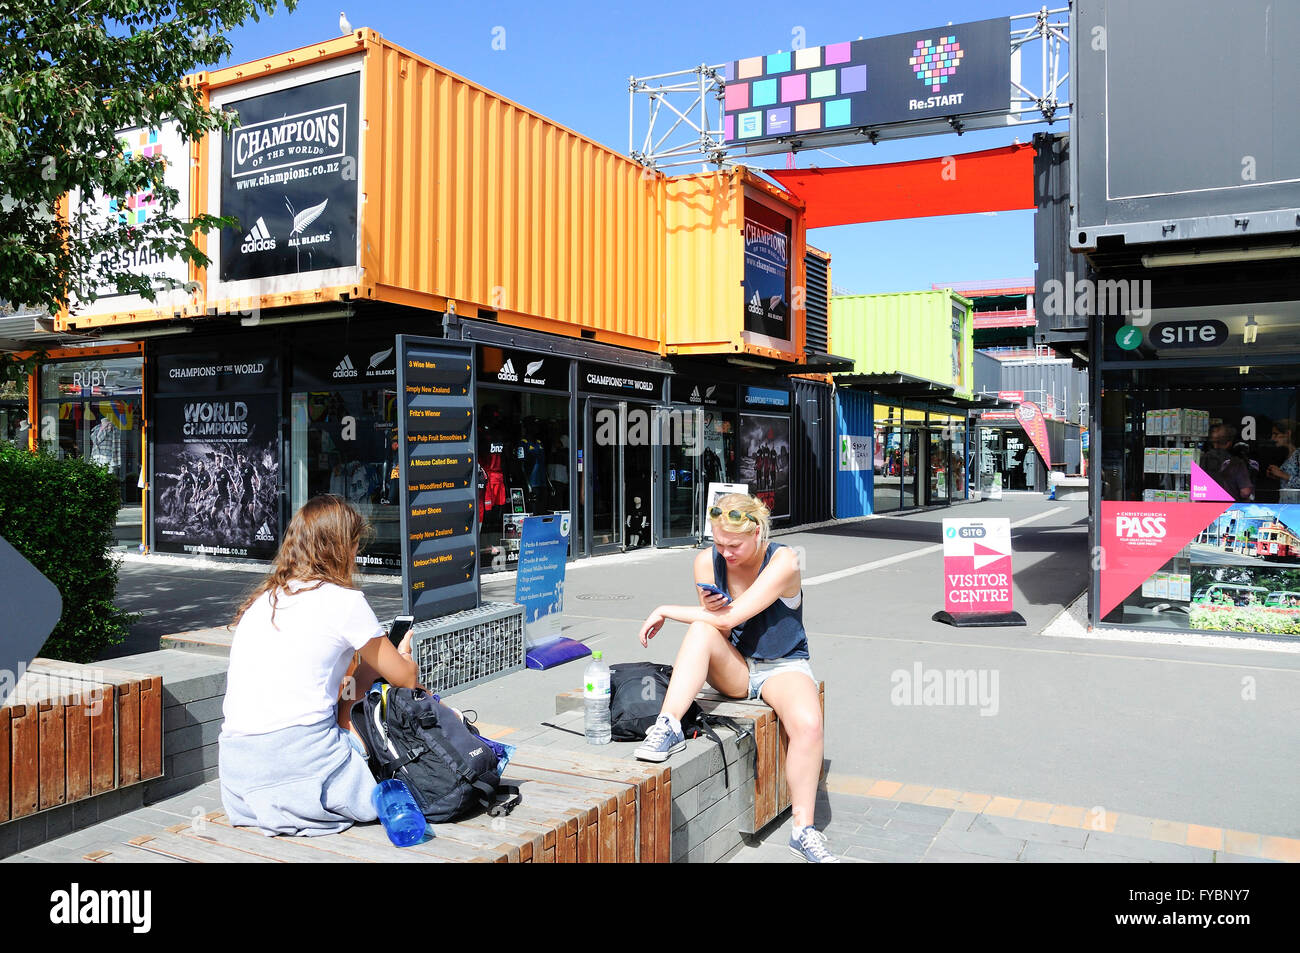 Entrance to Re:START Container Mall, Cashel Street, Christchurch, Canterbury, New Zealand Stock Photo